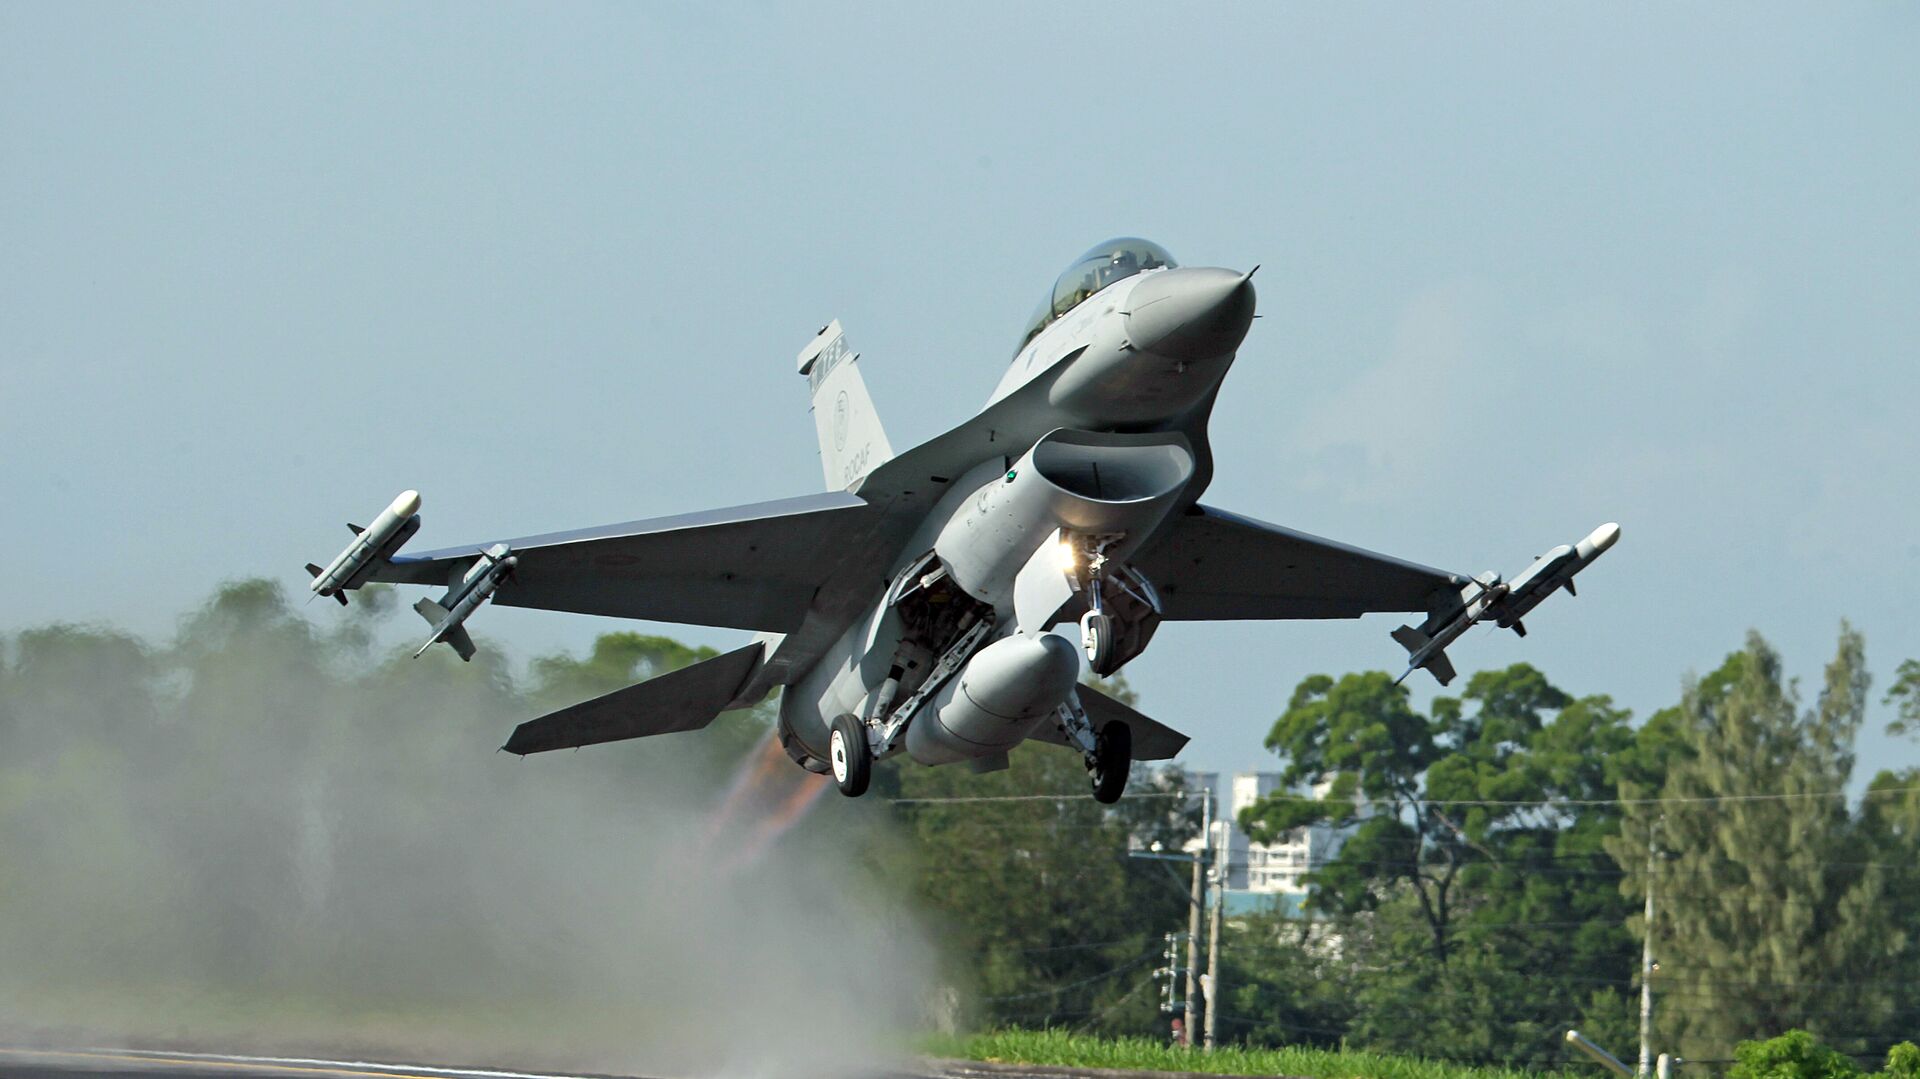  In this Sept. 16, 2014, file photo, a Taiwan Air Force F-16 fighter jet takes off from a closed section of highway during the annual Han Kuang military exercises in Chiayi, central Taiwan - Sputnik International, 1920, 04.10.2021